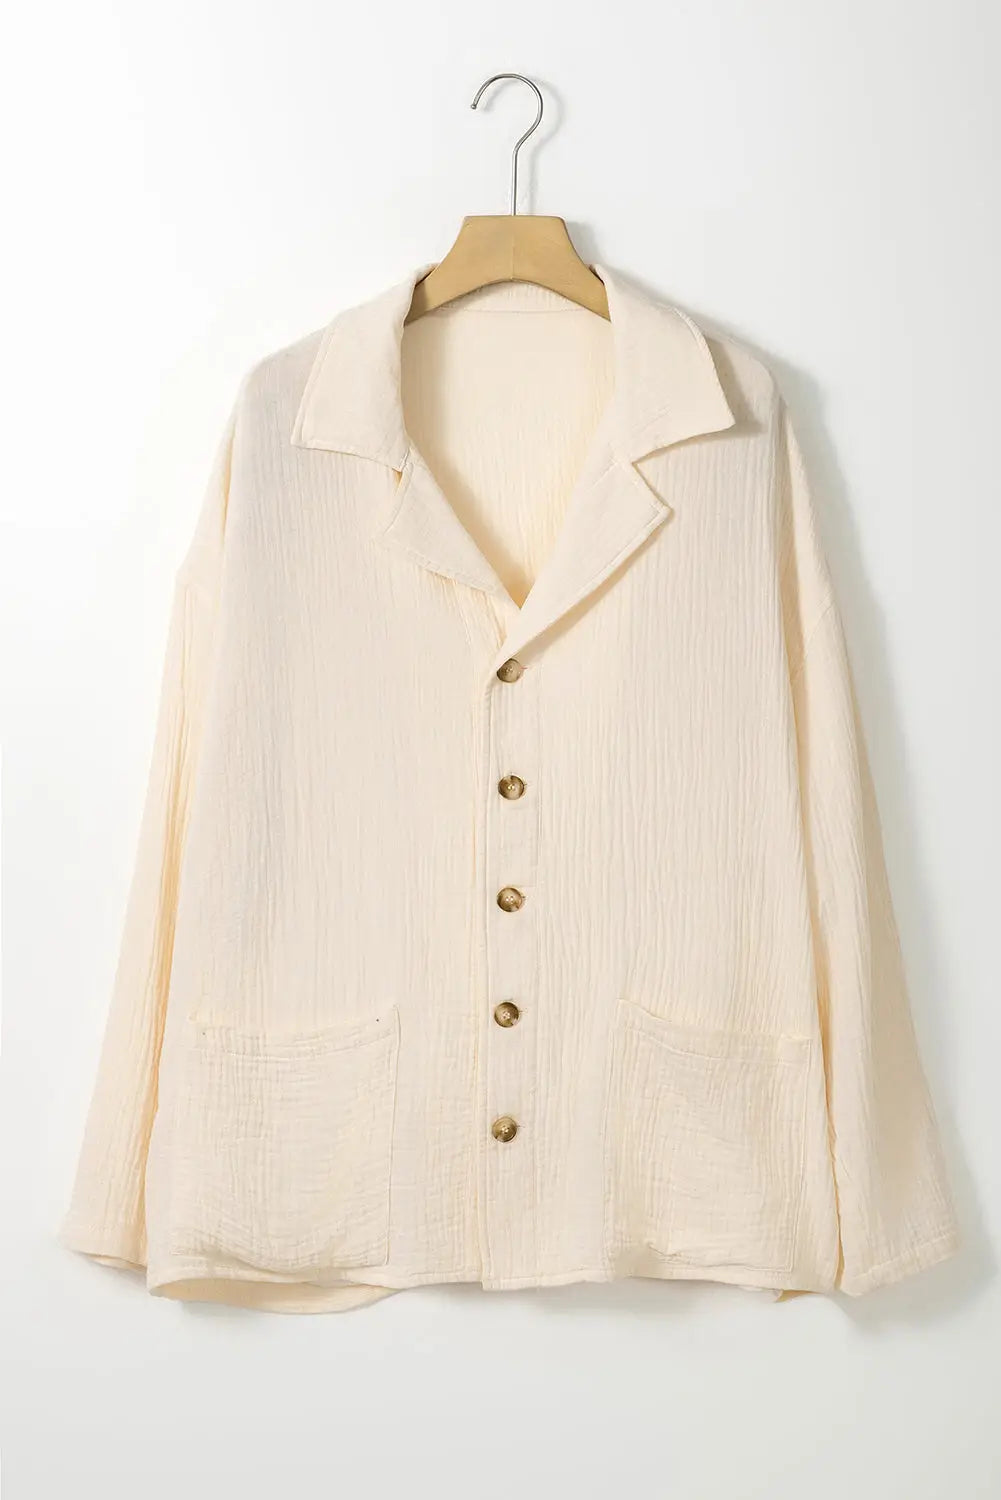 White crinkle textured lapel collar buttoned shirt - tops